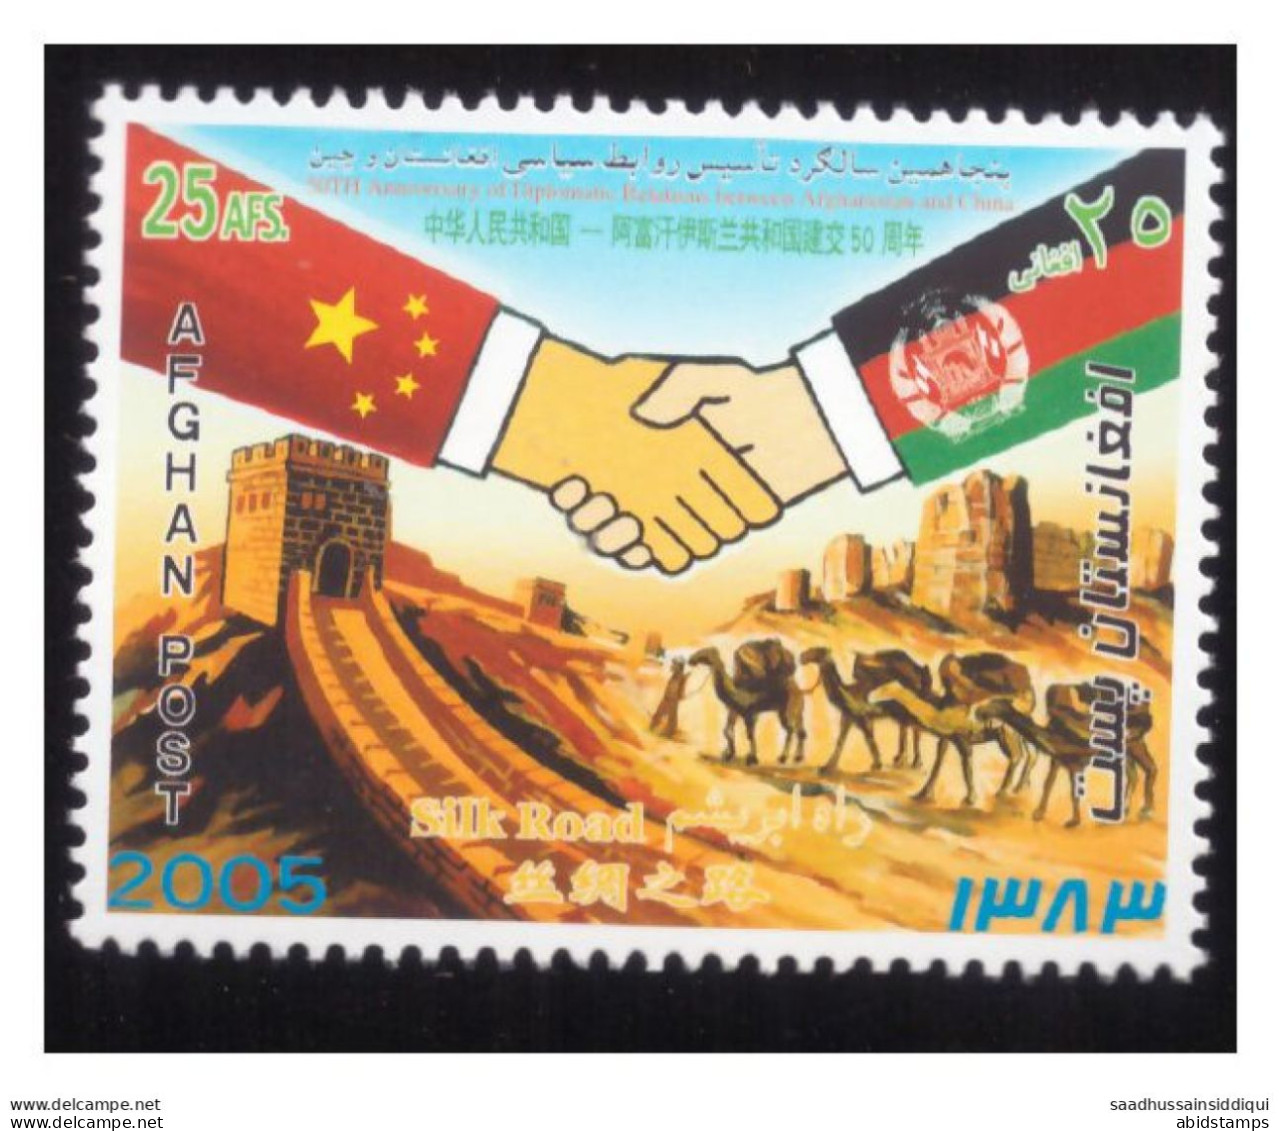 AFGHANISTAN 2005 STAMP 50TH ANNIVERSARY OF DIPLOMATIC RELATION BETWEEN AFGHANISTAN AND CHINA MNH - Afghanistan